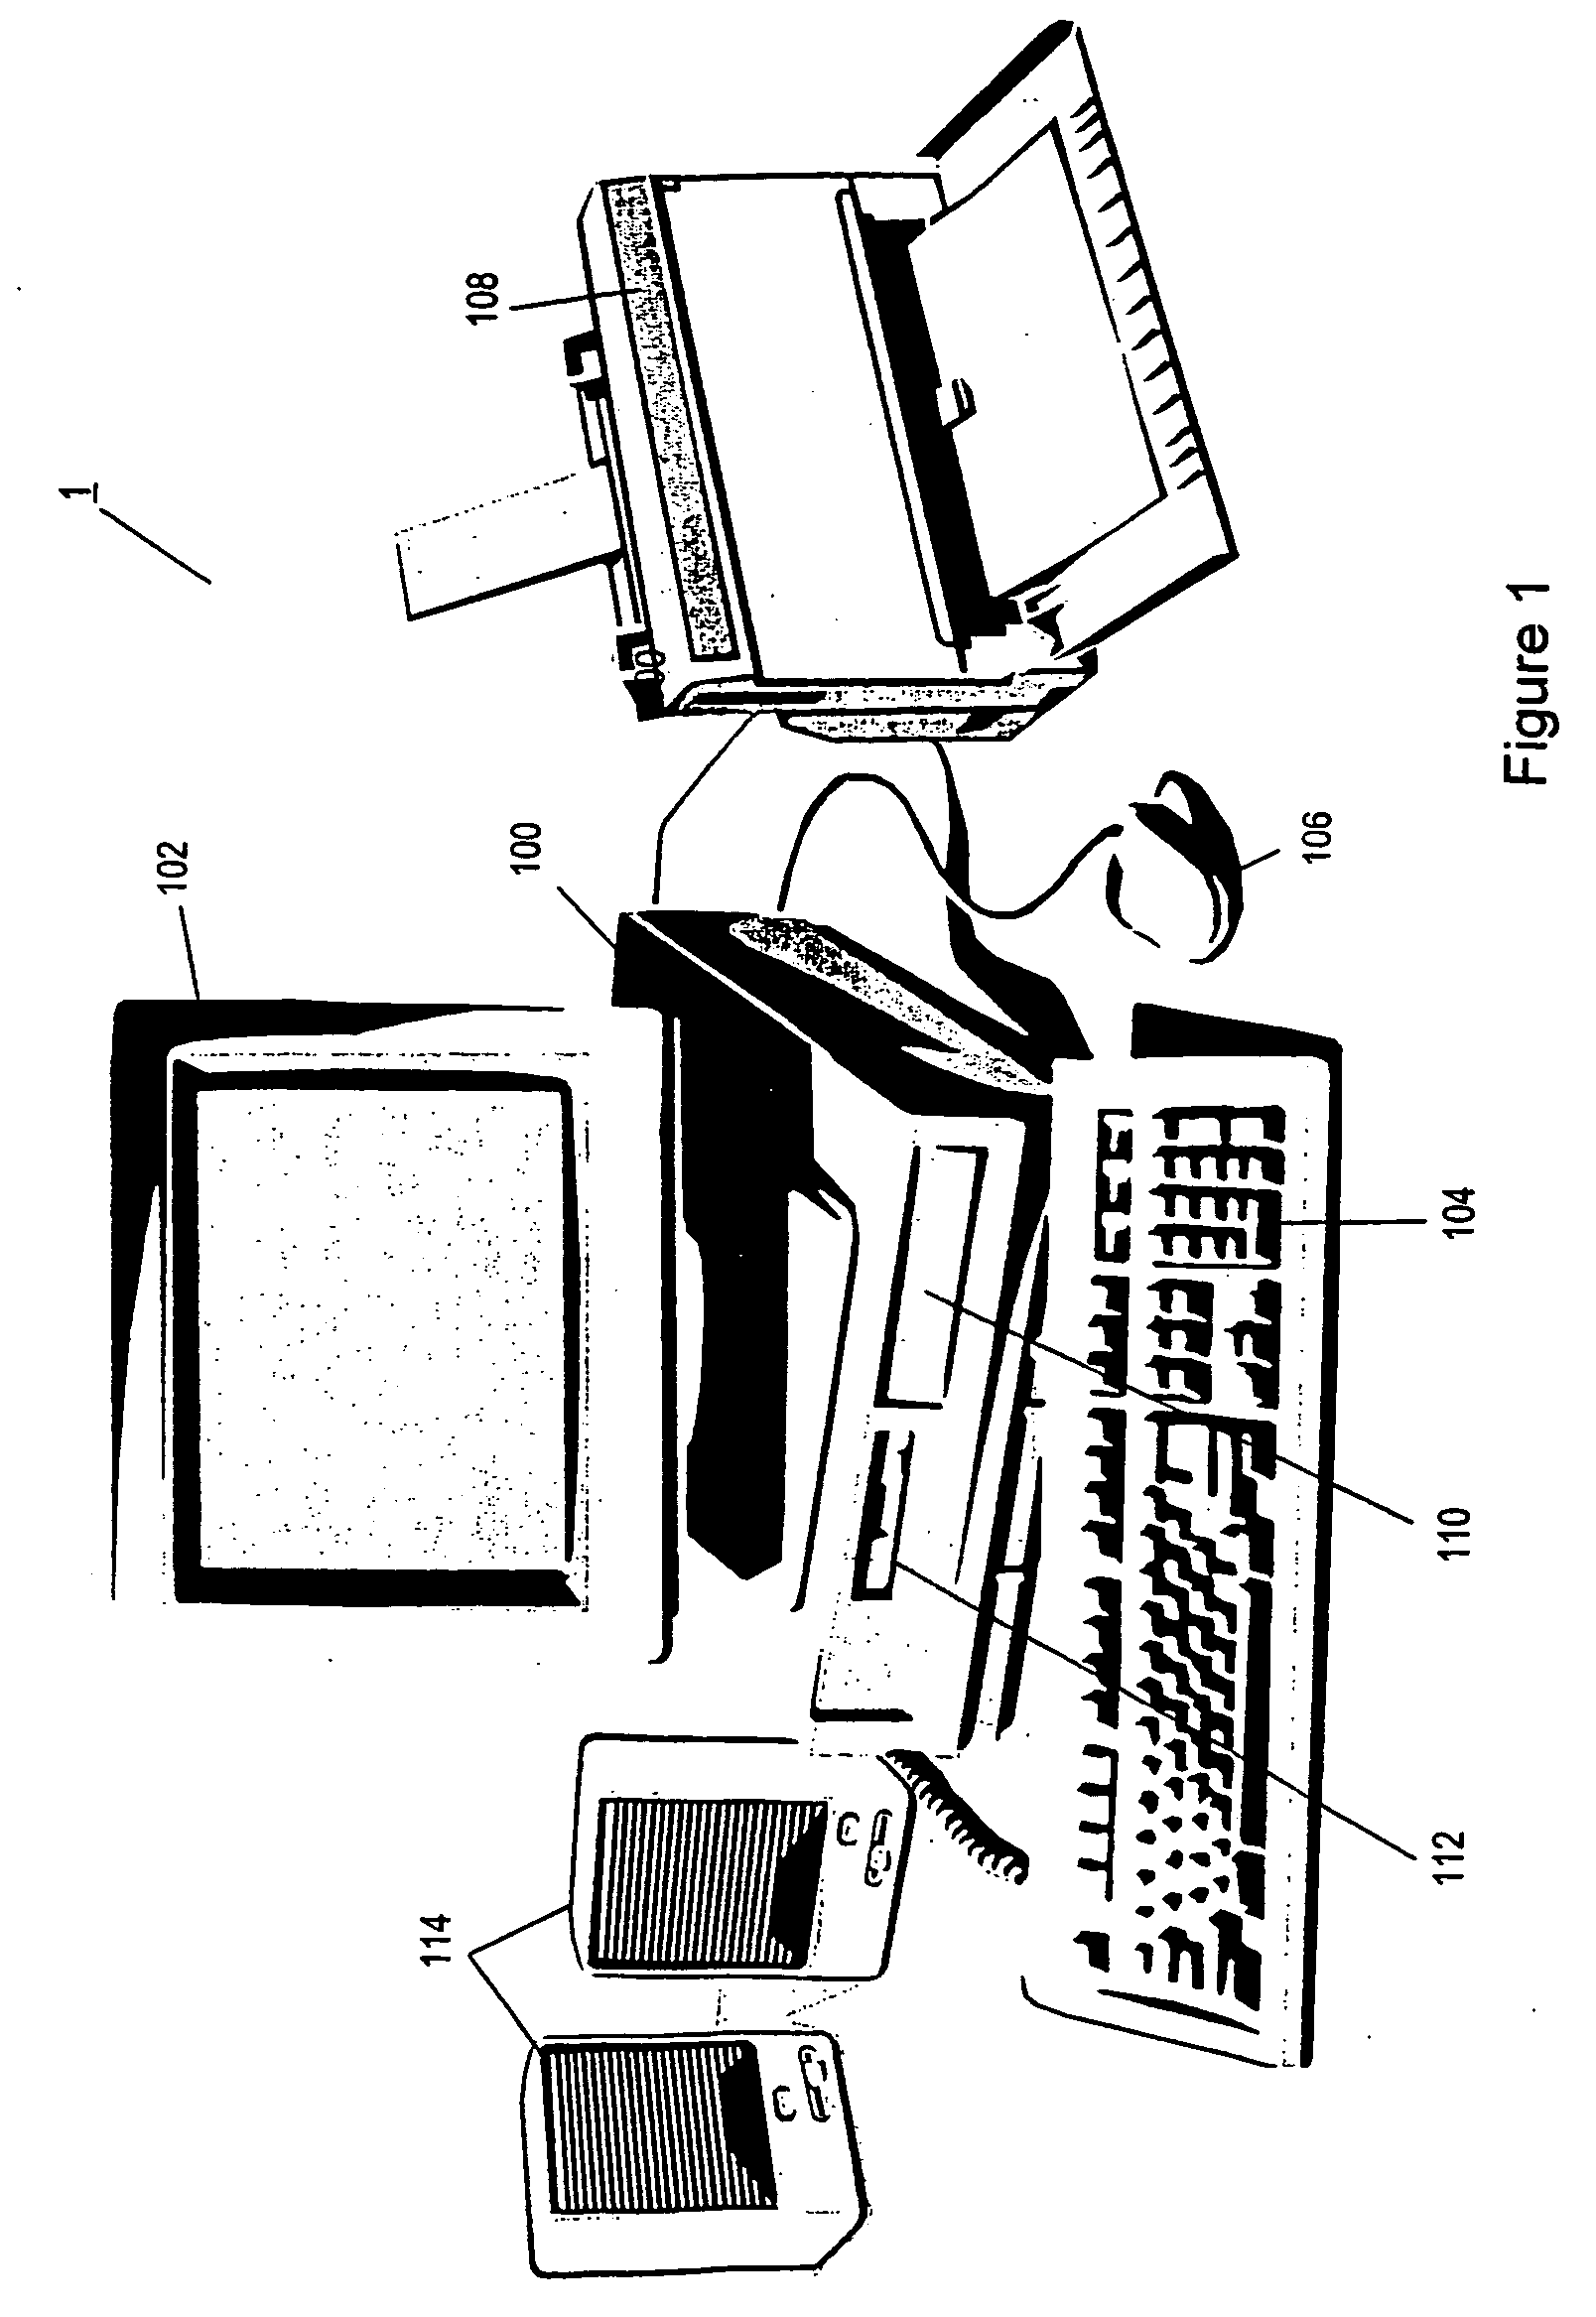 Method and system for classification of semantic content of audio/video data